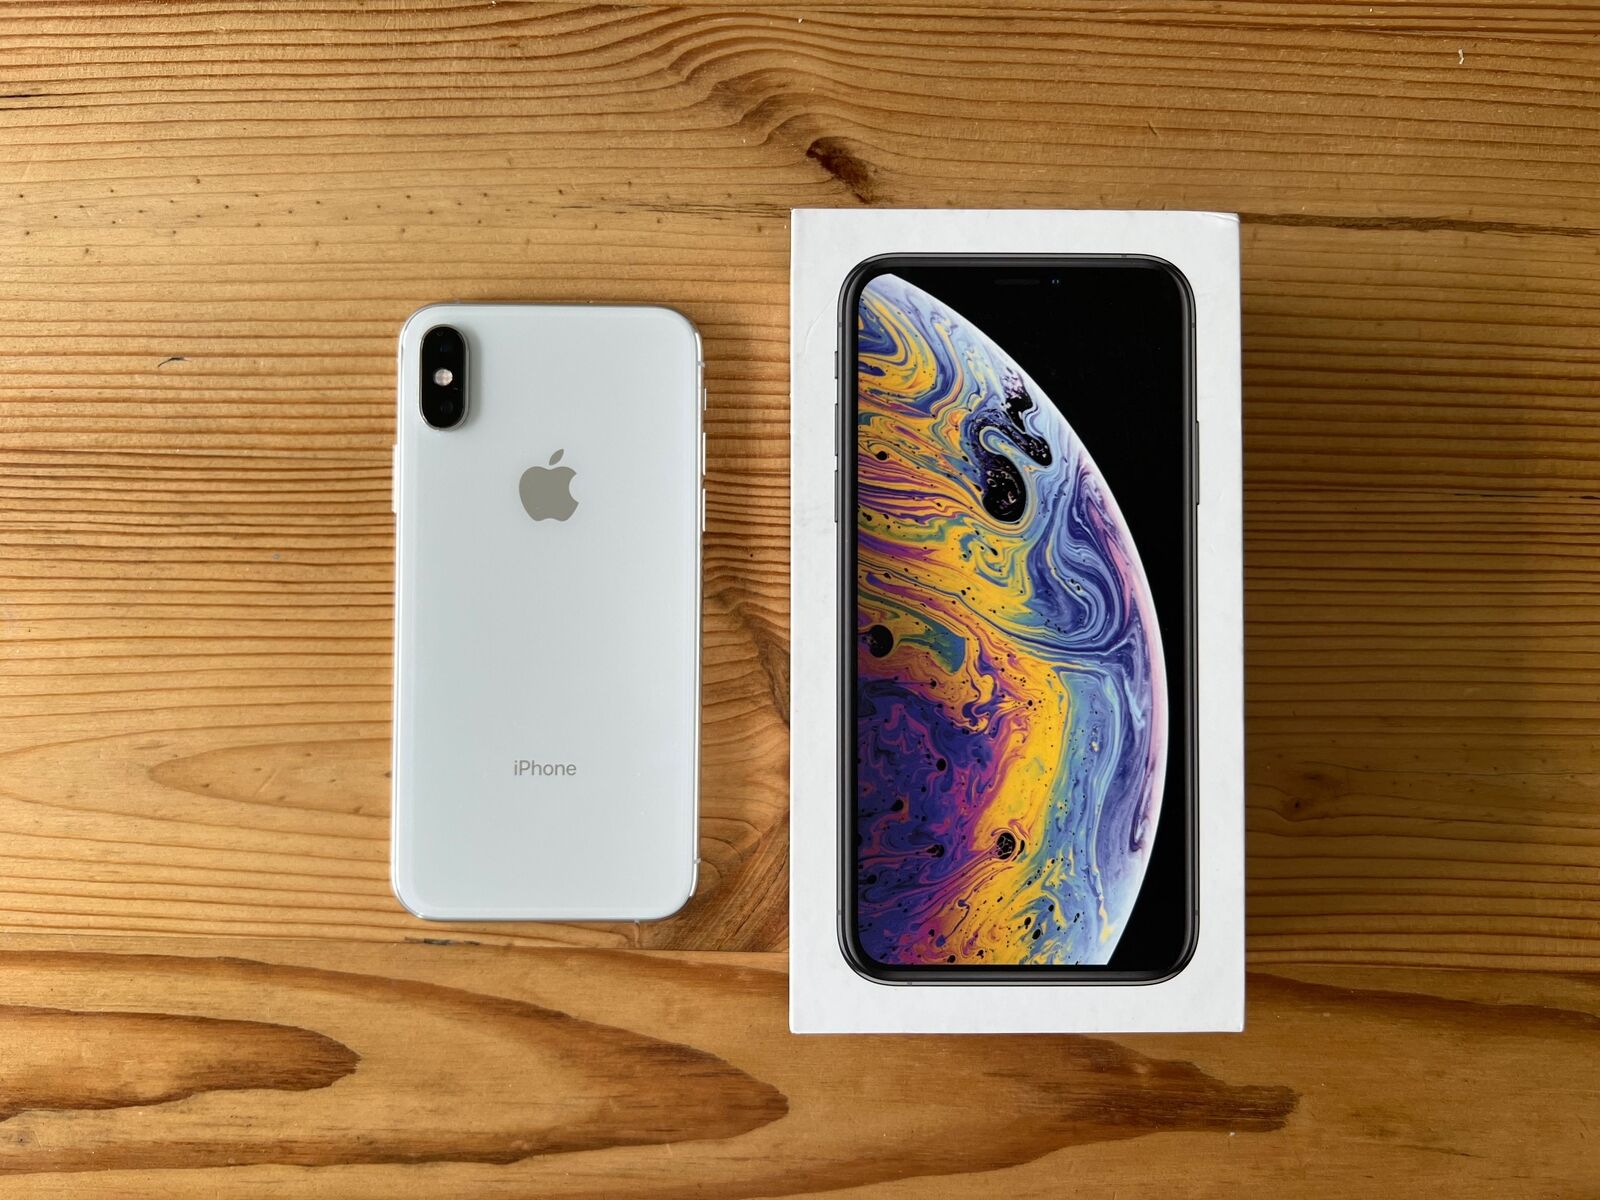 Apple iPhone XS - 512GB - Silver (Unlocked) A1920 (CDMA + GSM) for 